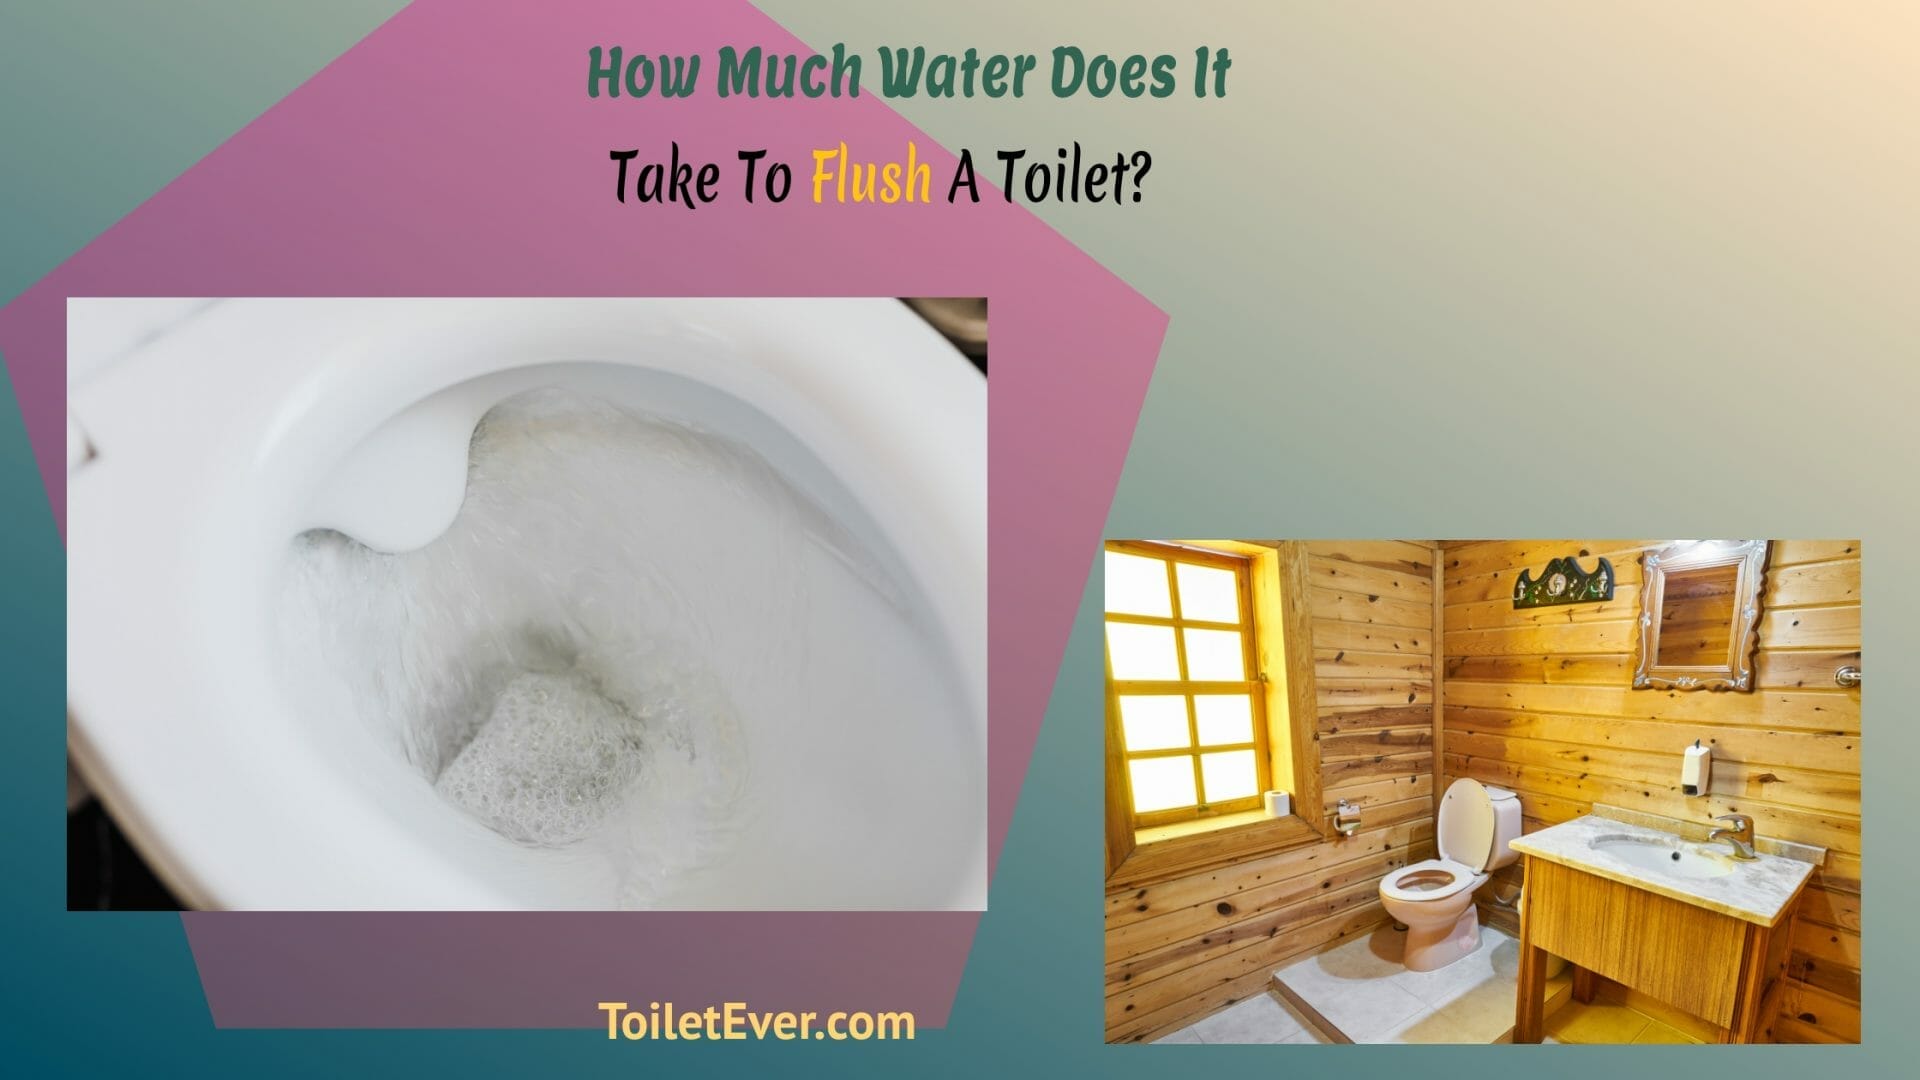 How Much Water Does It Take To Flush A Toilet